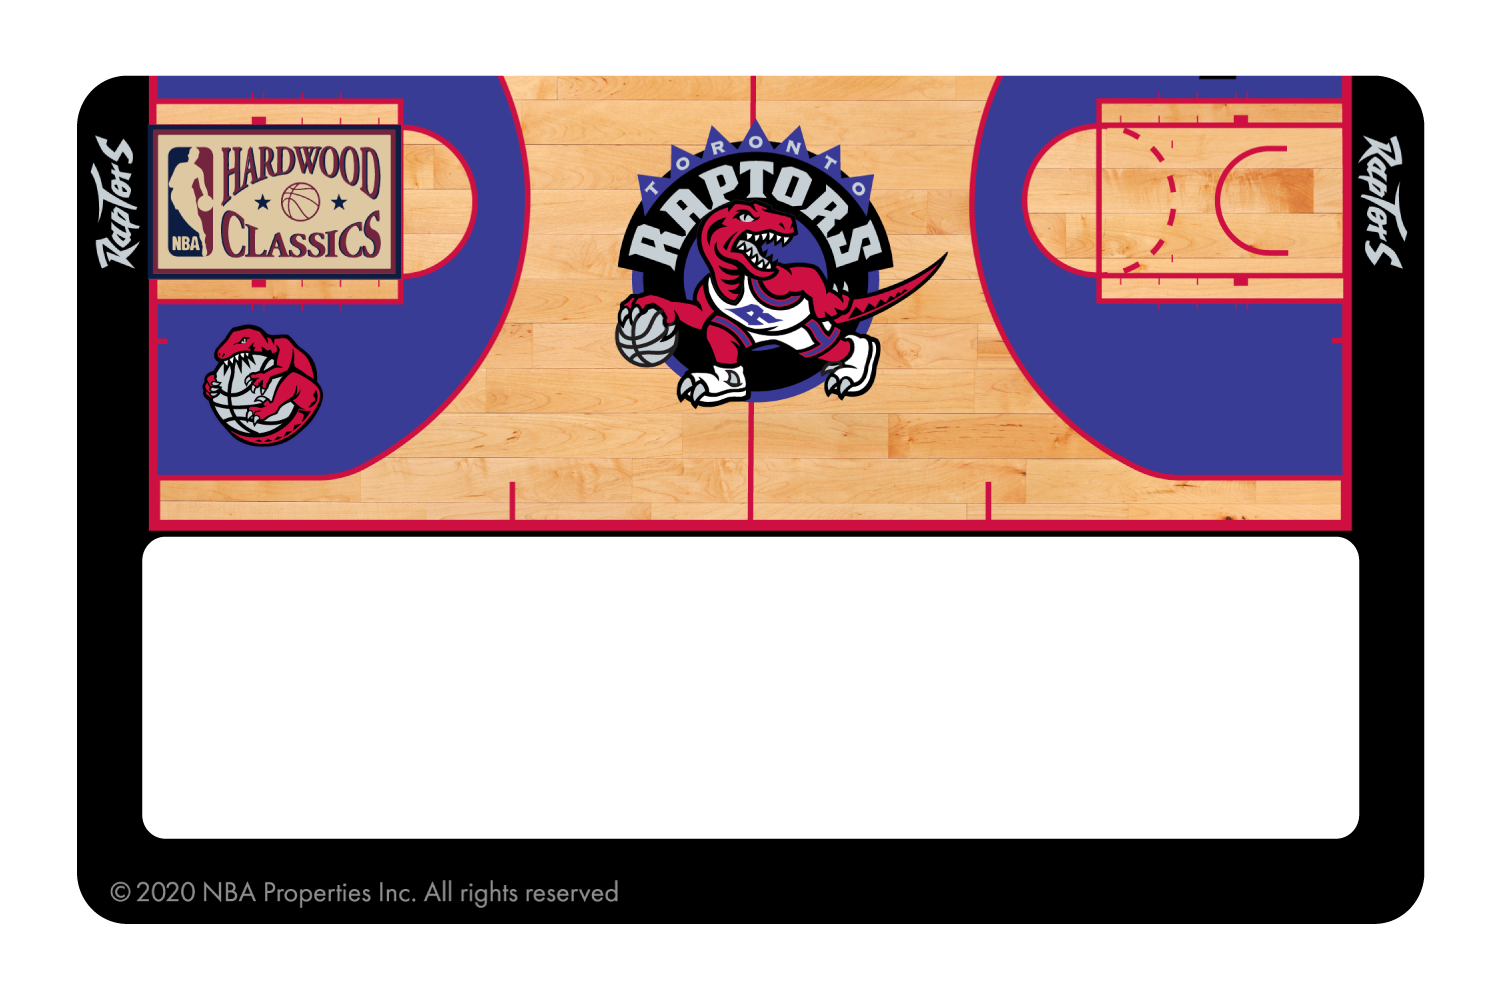 The Raptors might be turning back the clocks with throwback court